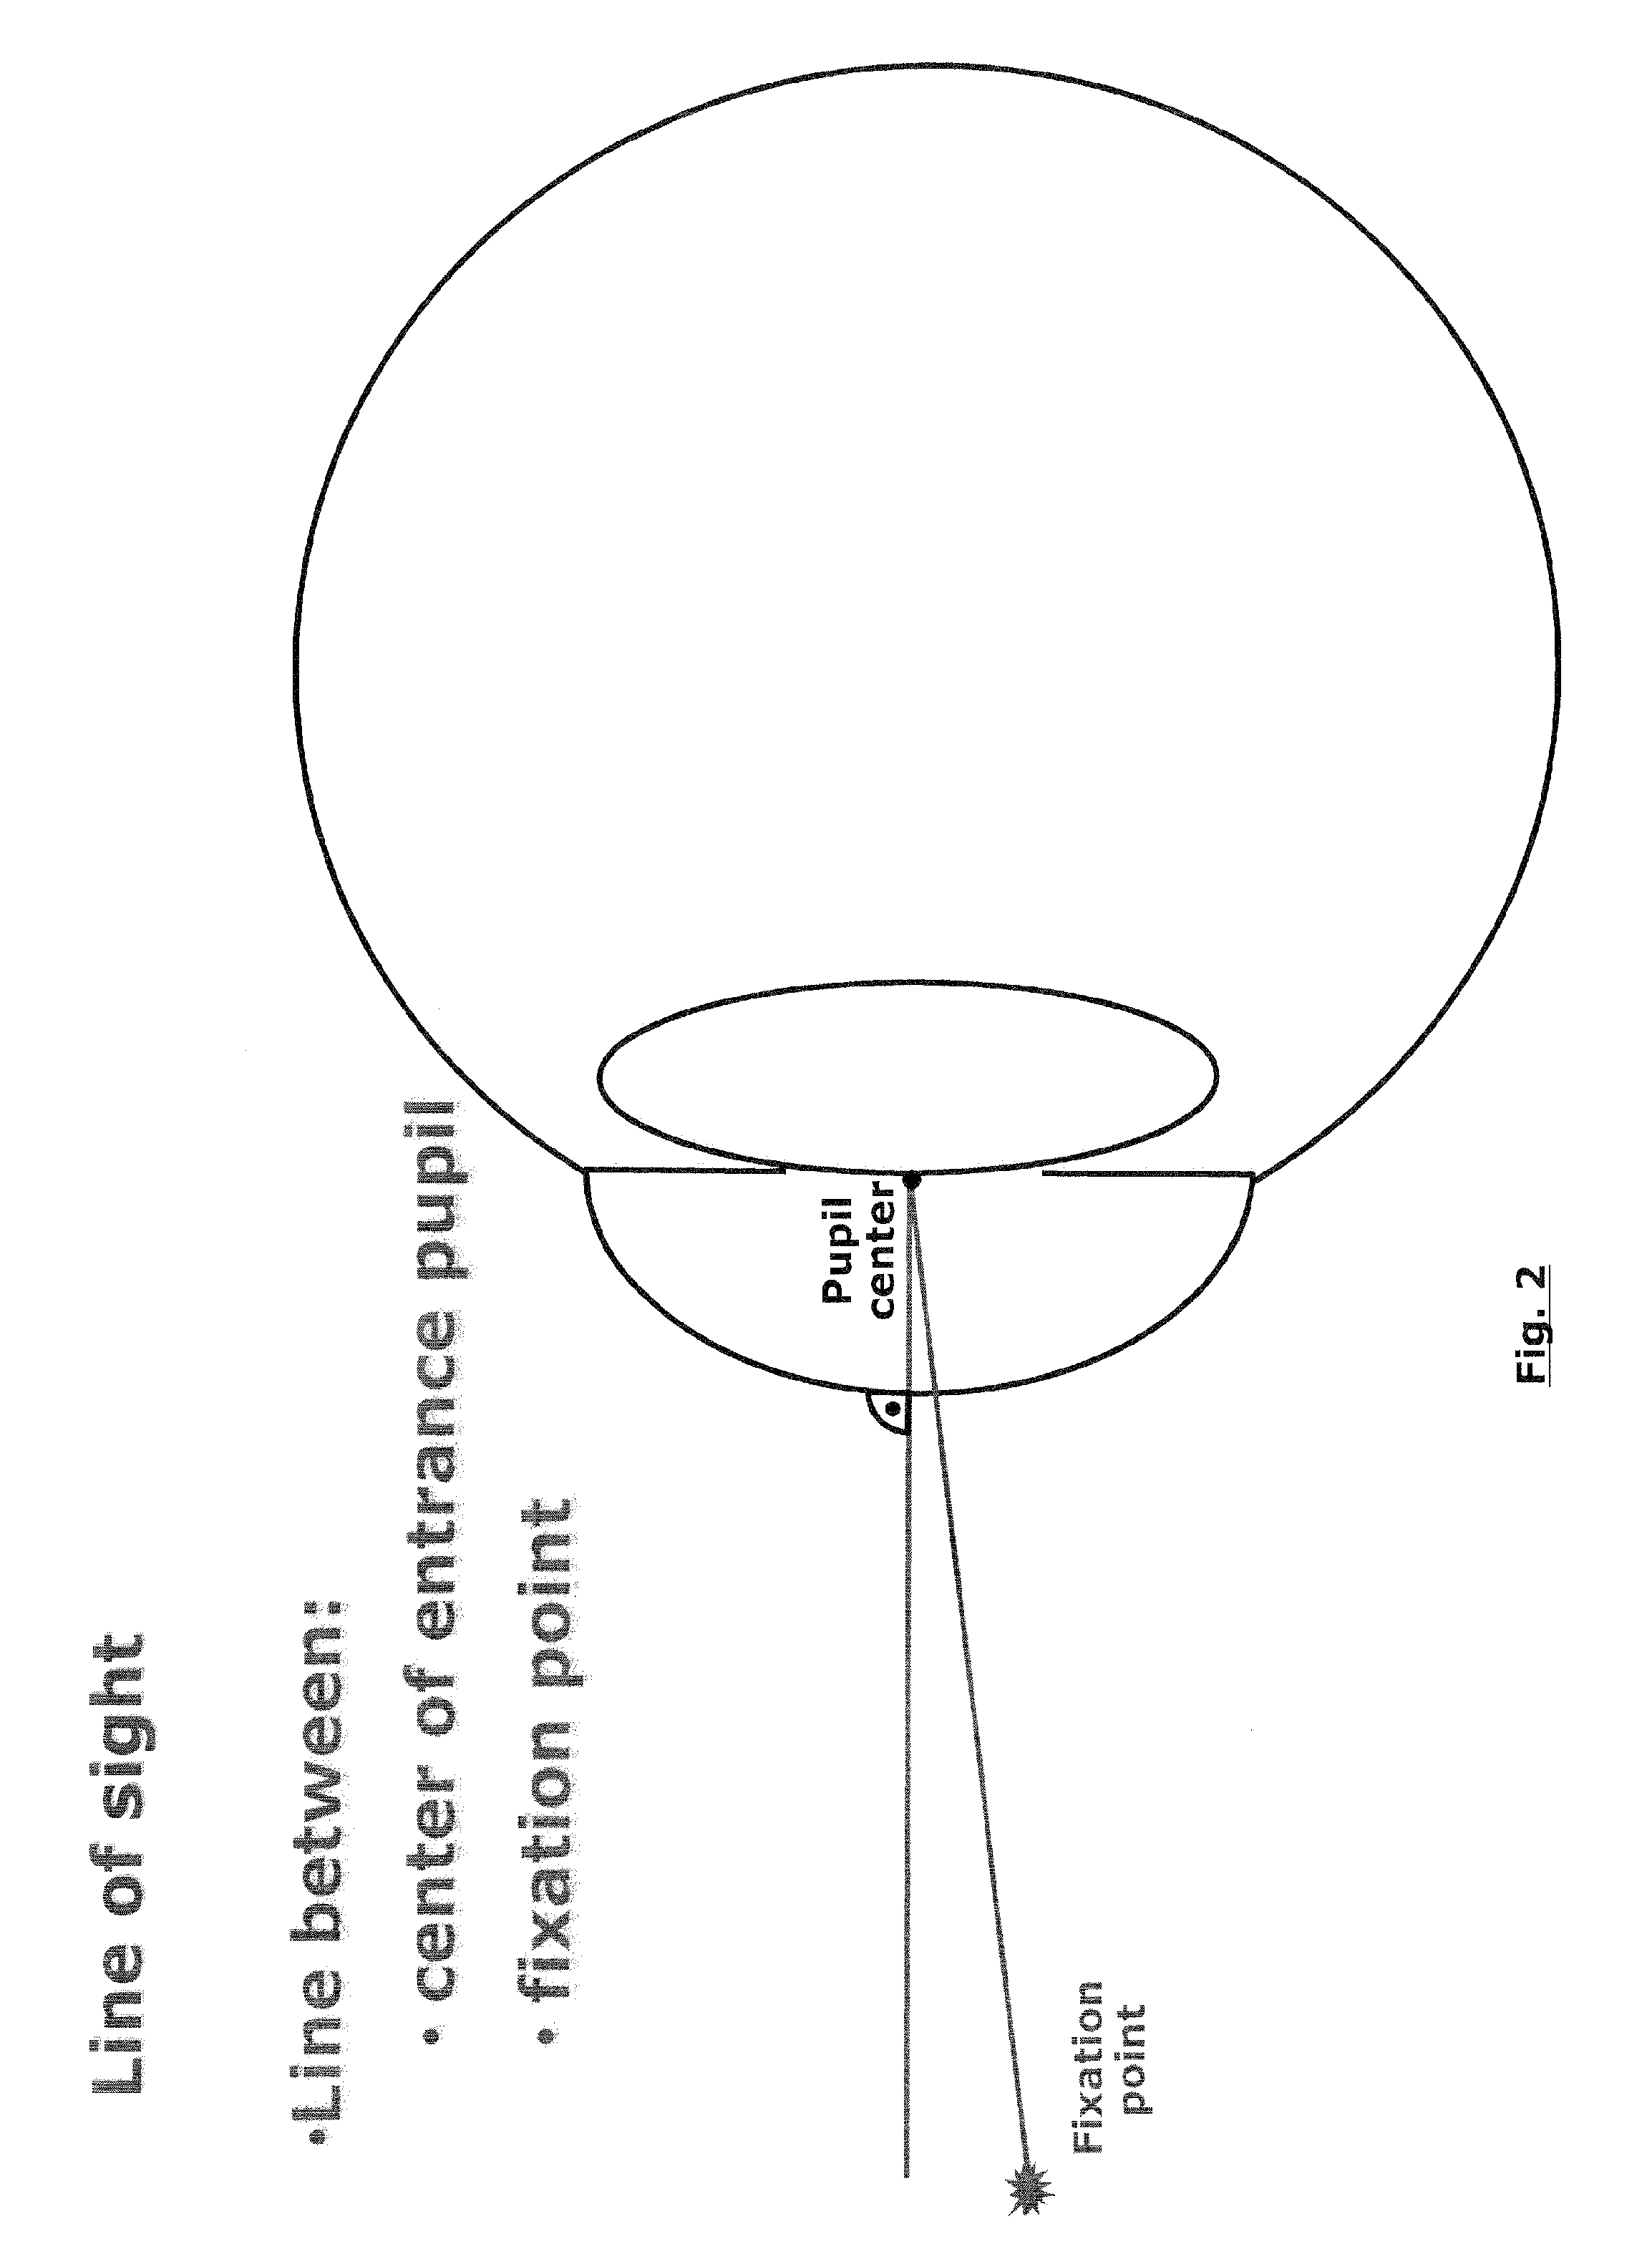 Apparatus for monitoring one or more parameters of the eye